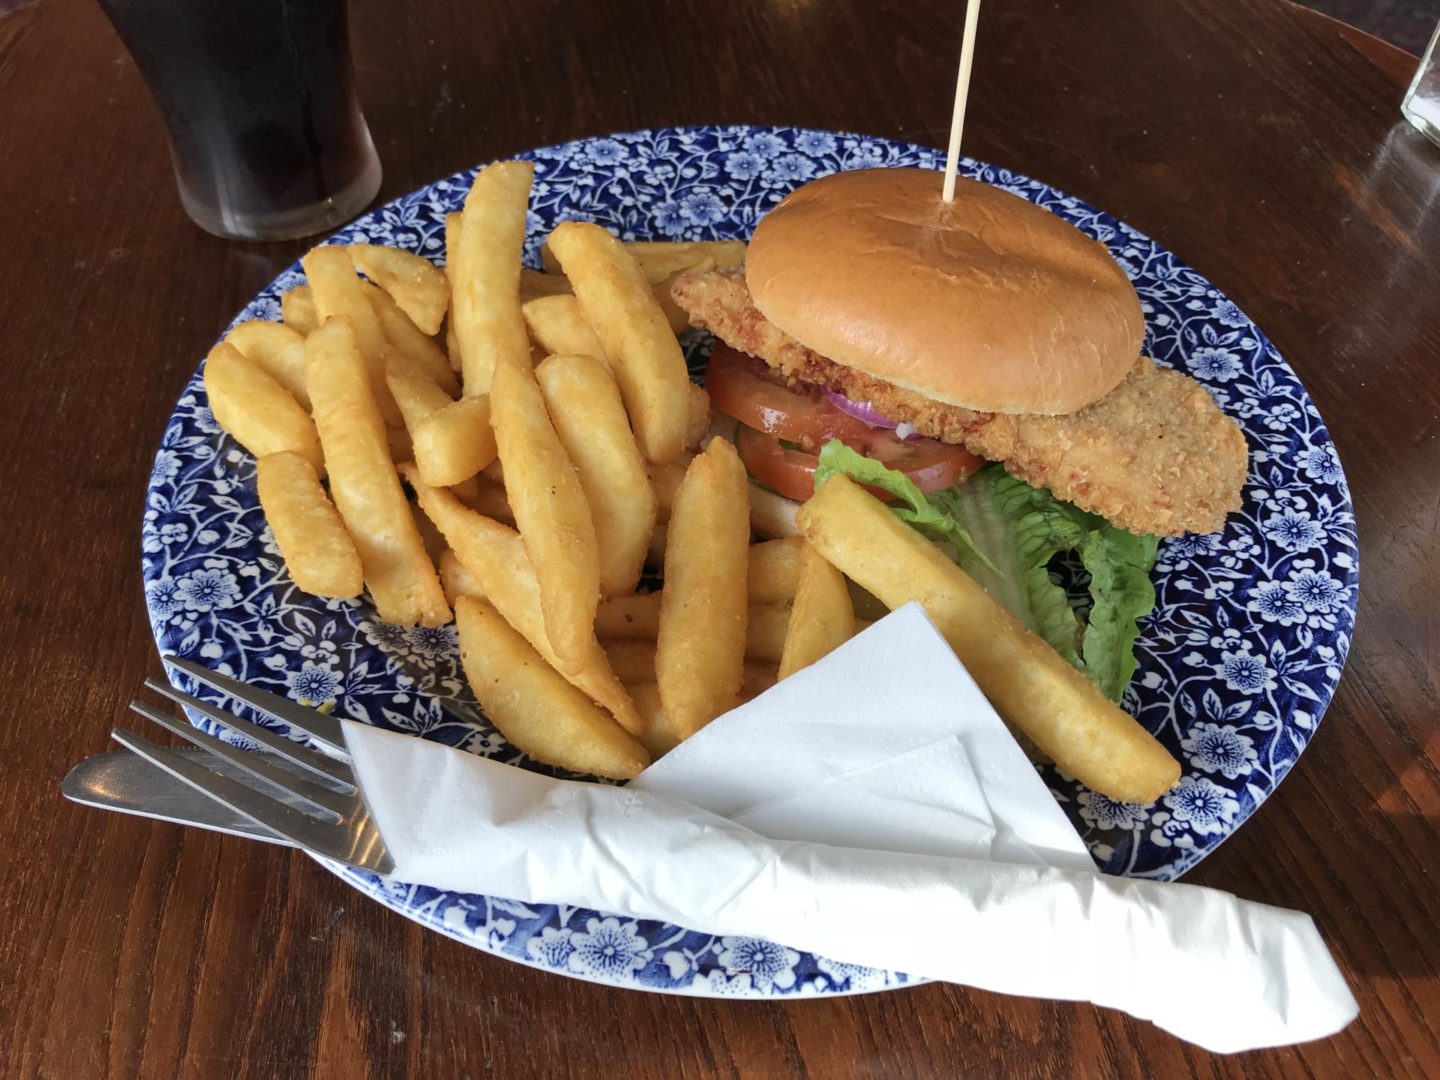 DON’T WORRY, WETHERSPOONS. WE STILL LOVE YOU